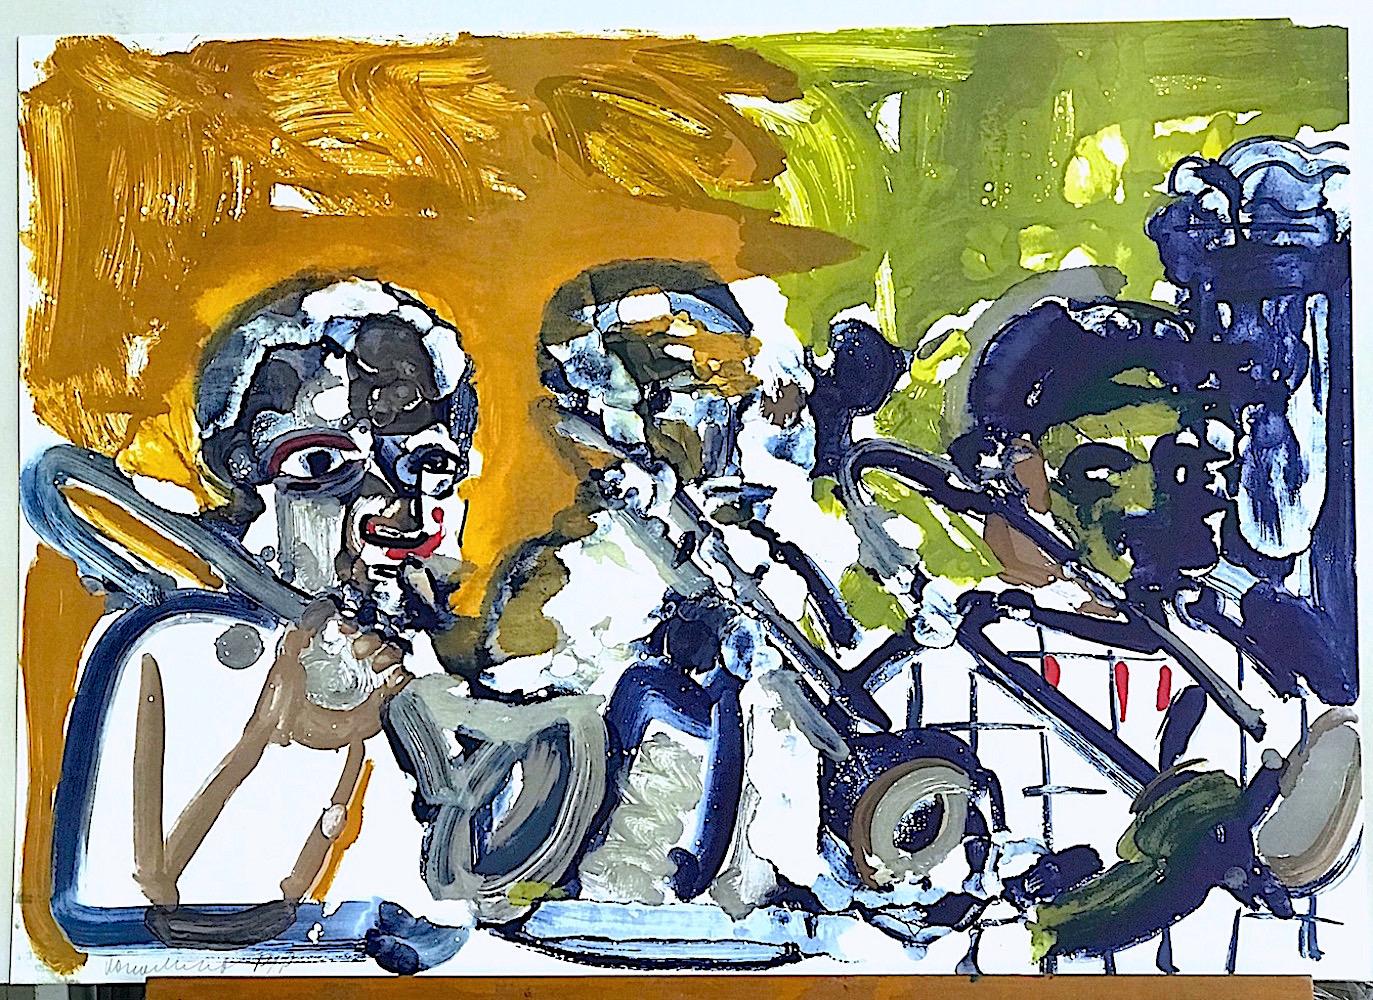 BRASS SECTION  Signed Lithograph, Abstract Jazz Horn Trio, Gold, Green, Navy - Contemporary Print by Romare Bearden